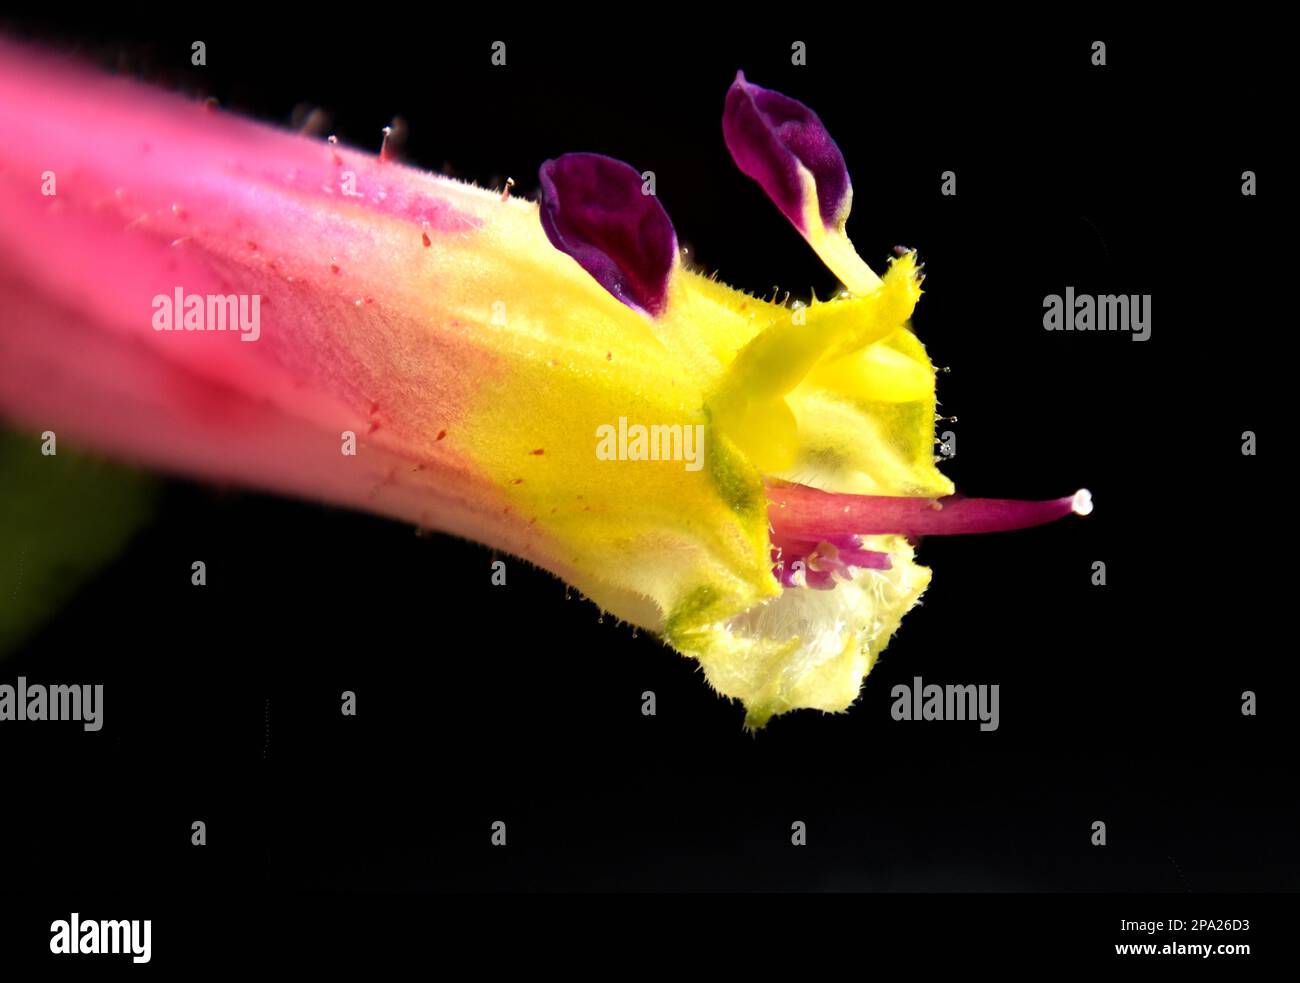 High magnification image of Cuphea ignea (Triple Crown) pink and yellow flower Stock Photo